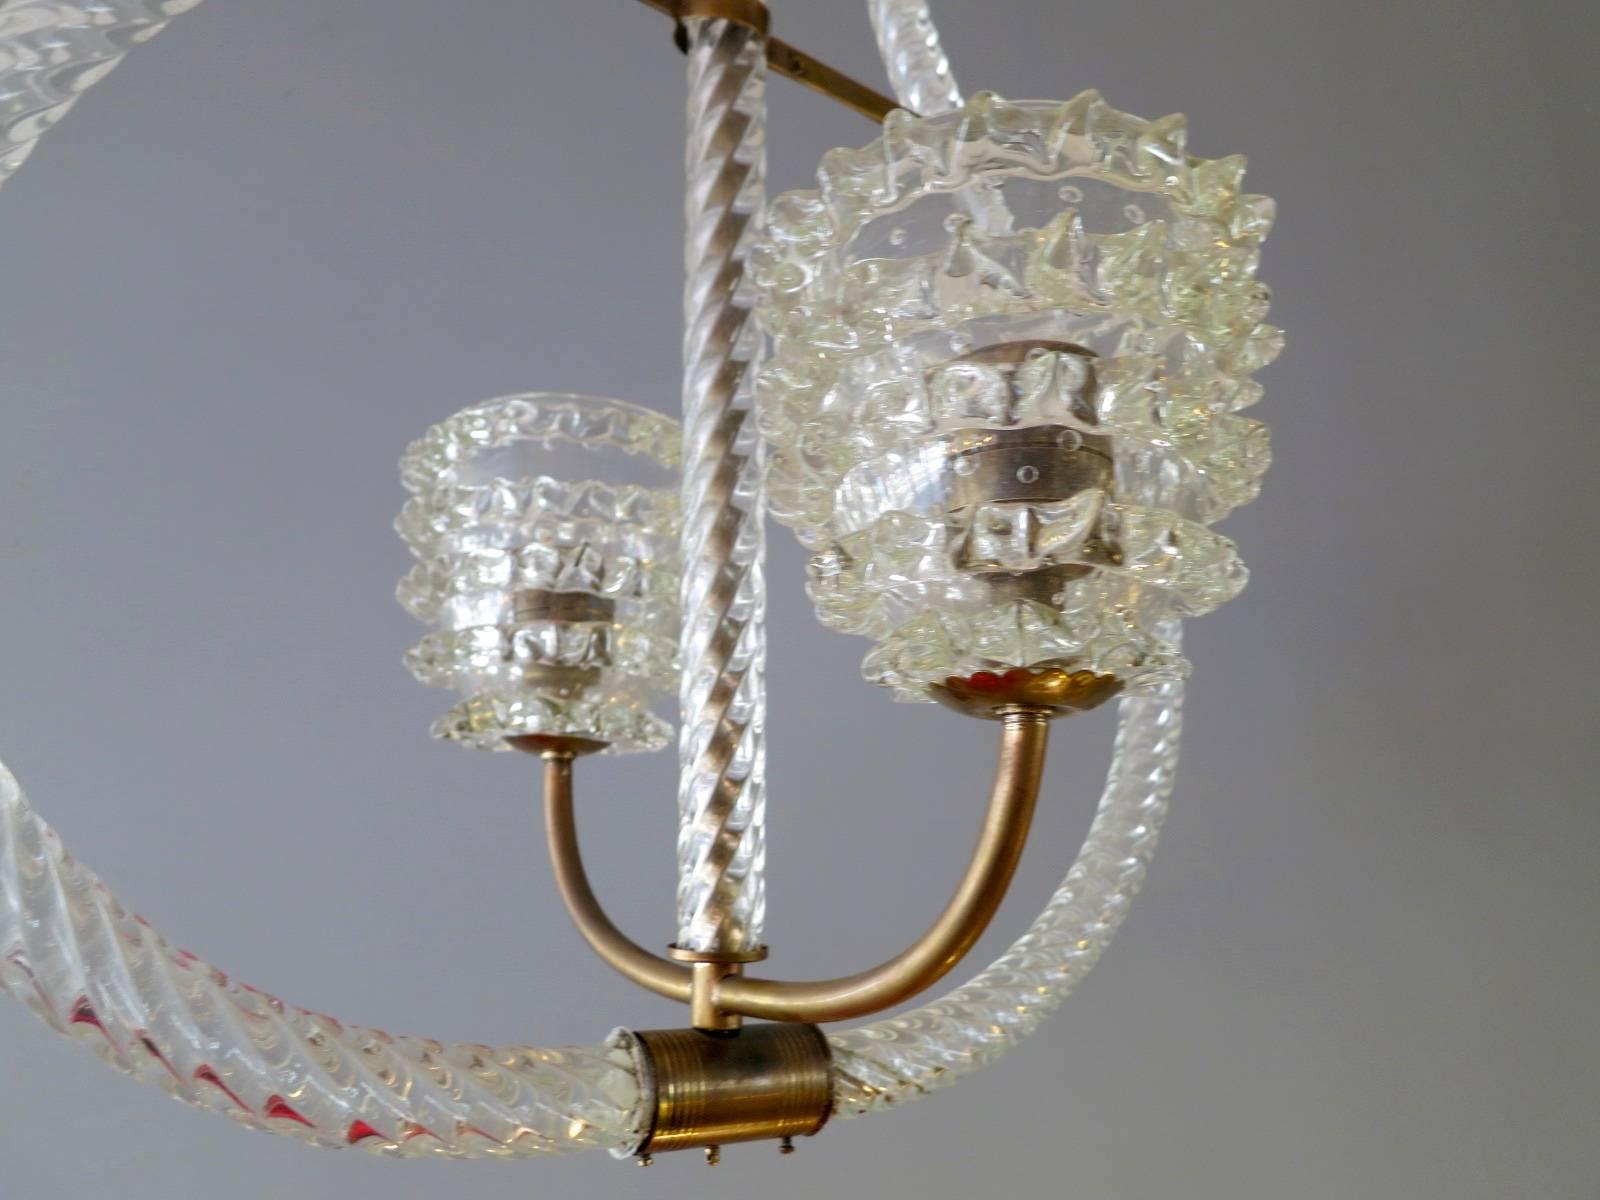 An early 20th century pendant by Barovier & Toso. Delicate rope twisted glass with brass fittings and cut-glass light shades and ceiling rose. The light fittings swing out to desired position. Re wired.